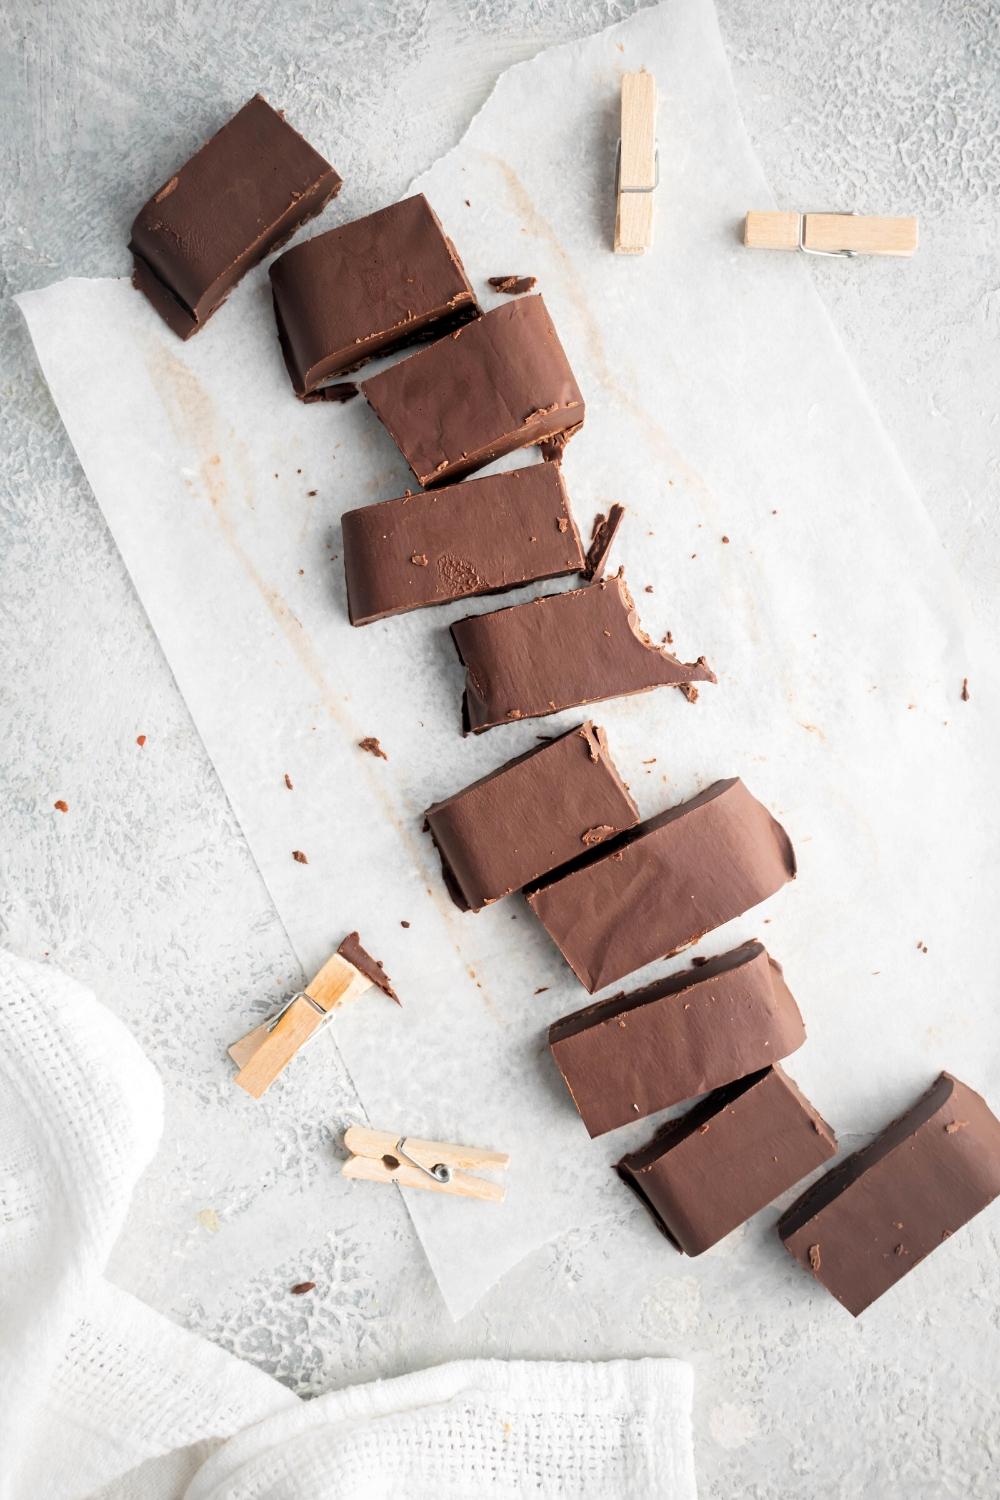 A diagonal line of ten pieces of fudge on a sheet of parchment paper on a white counter.